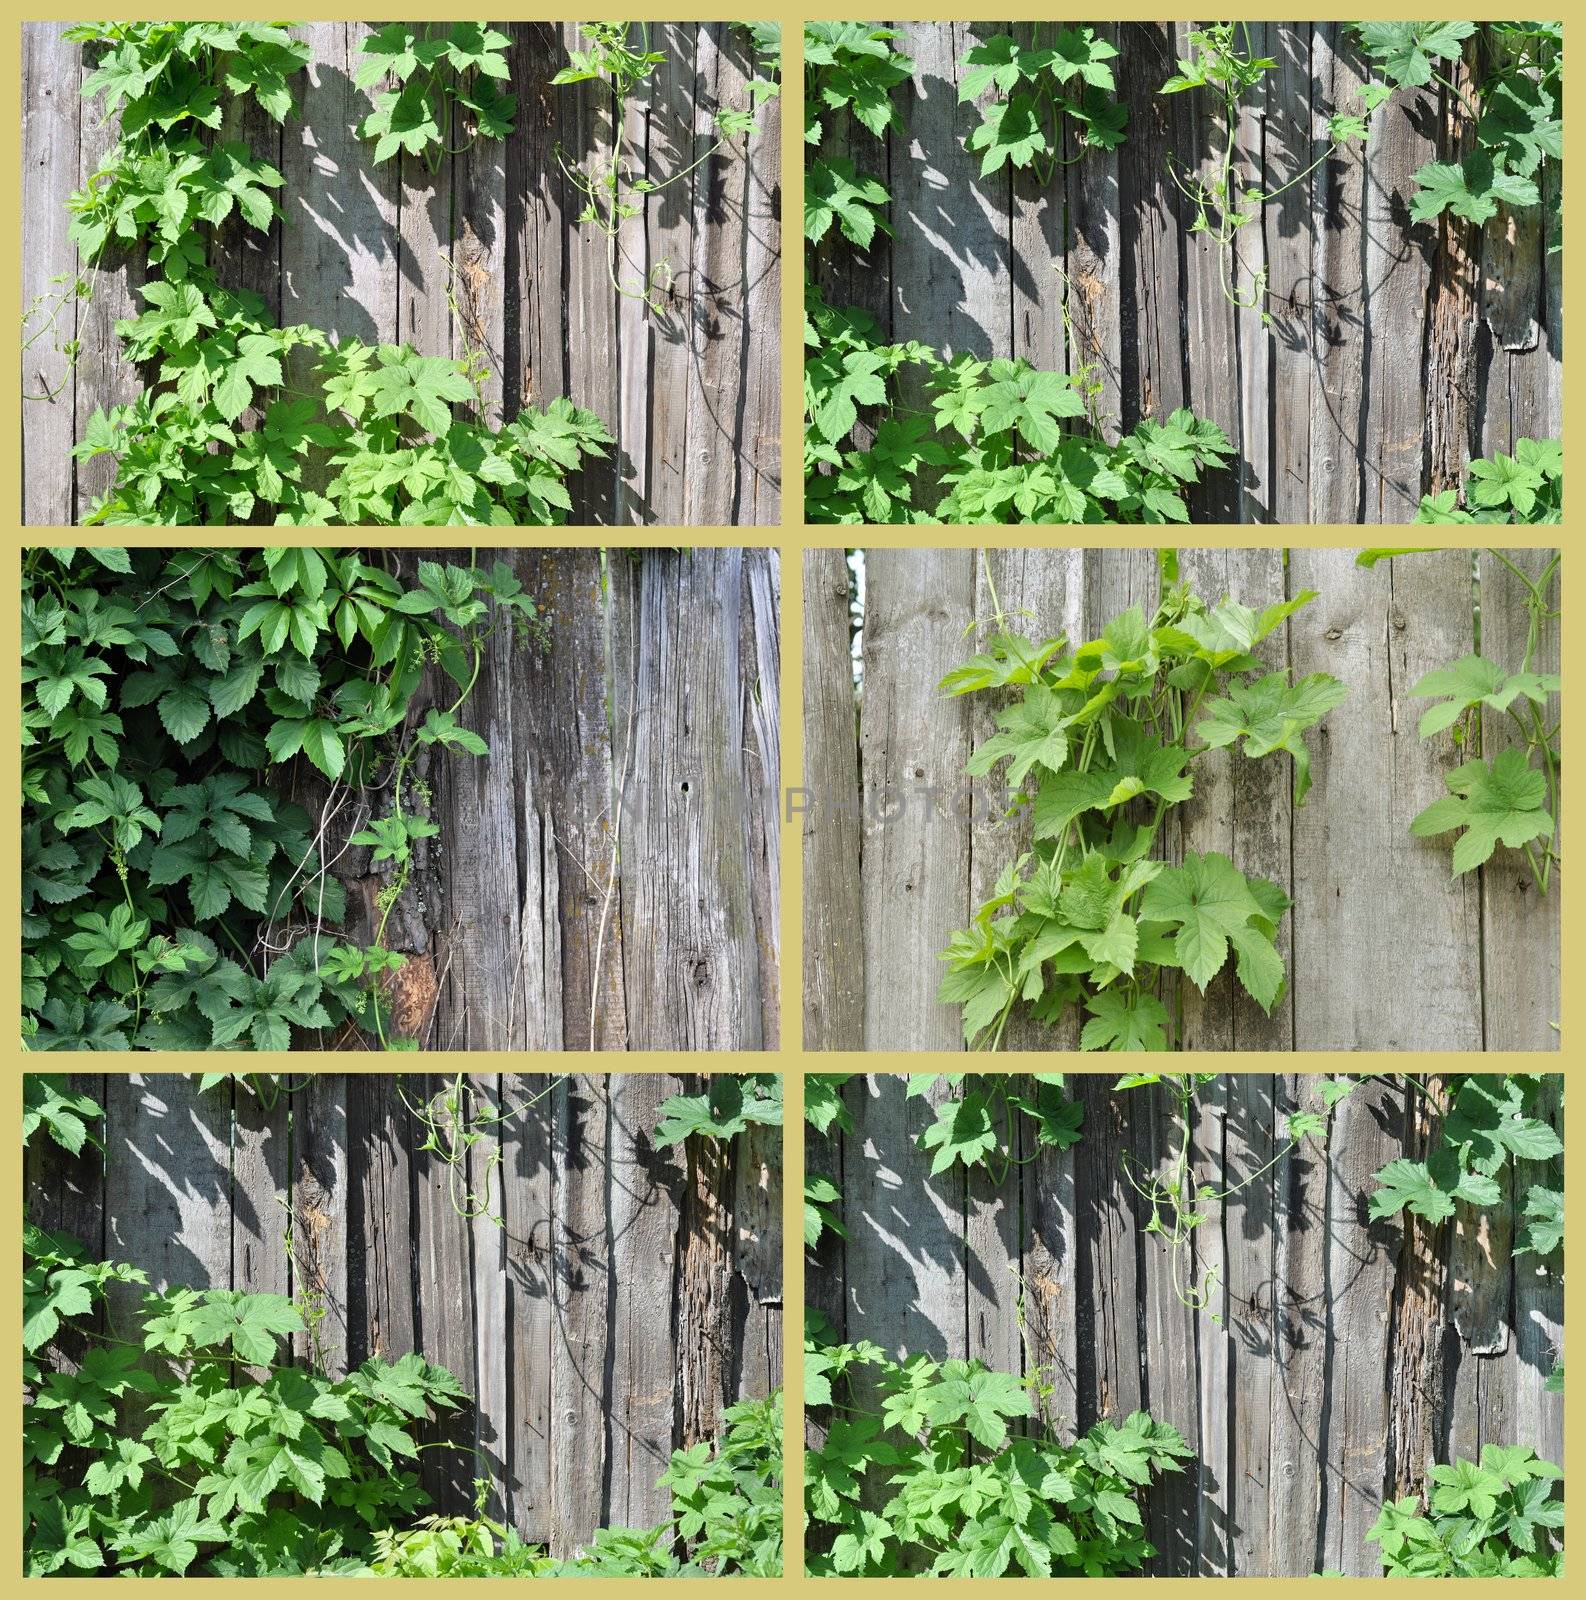 Natural background: old wooden fence and a climber plant hop